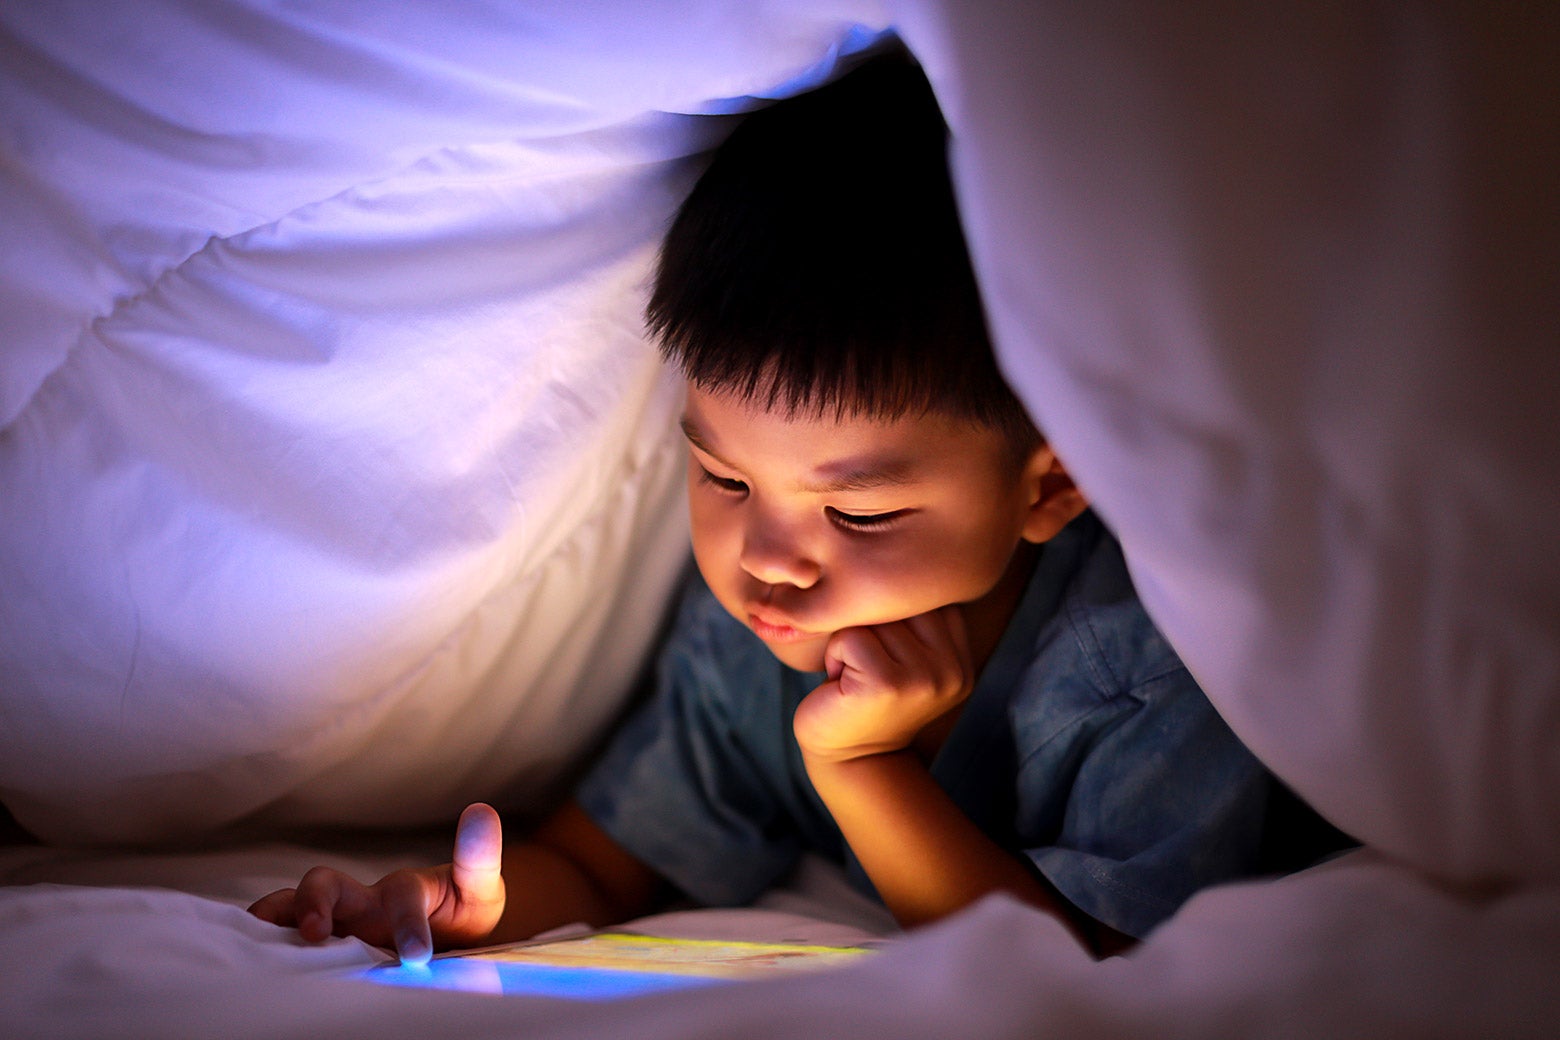 A small child uses a tablet under the covers.